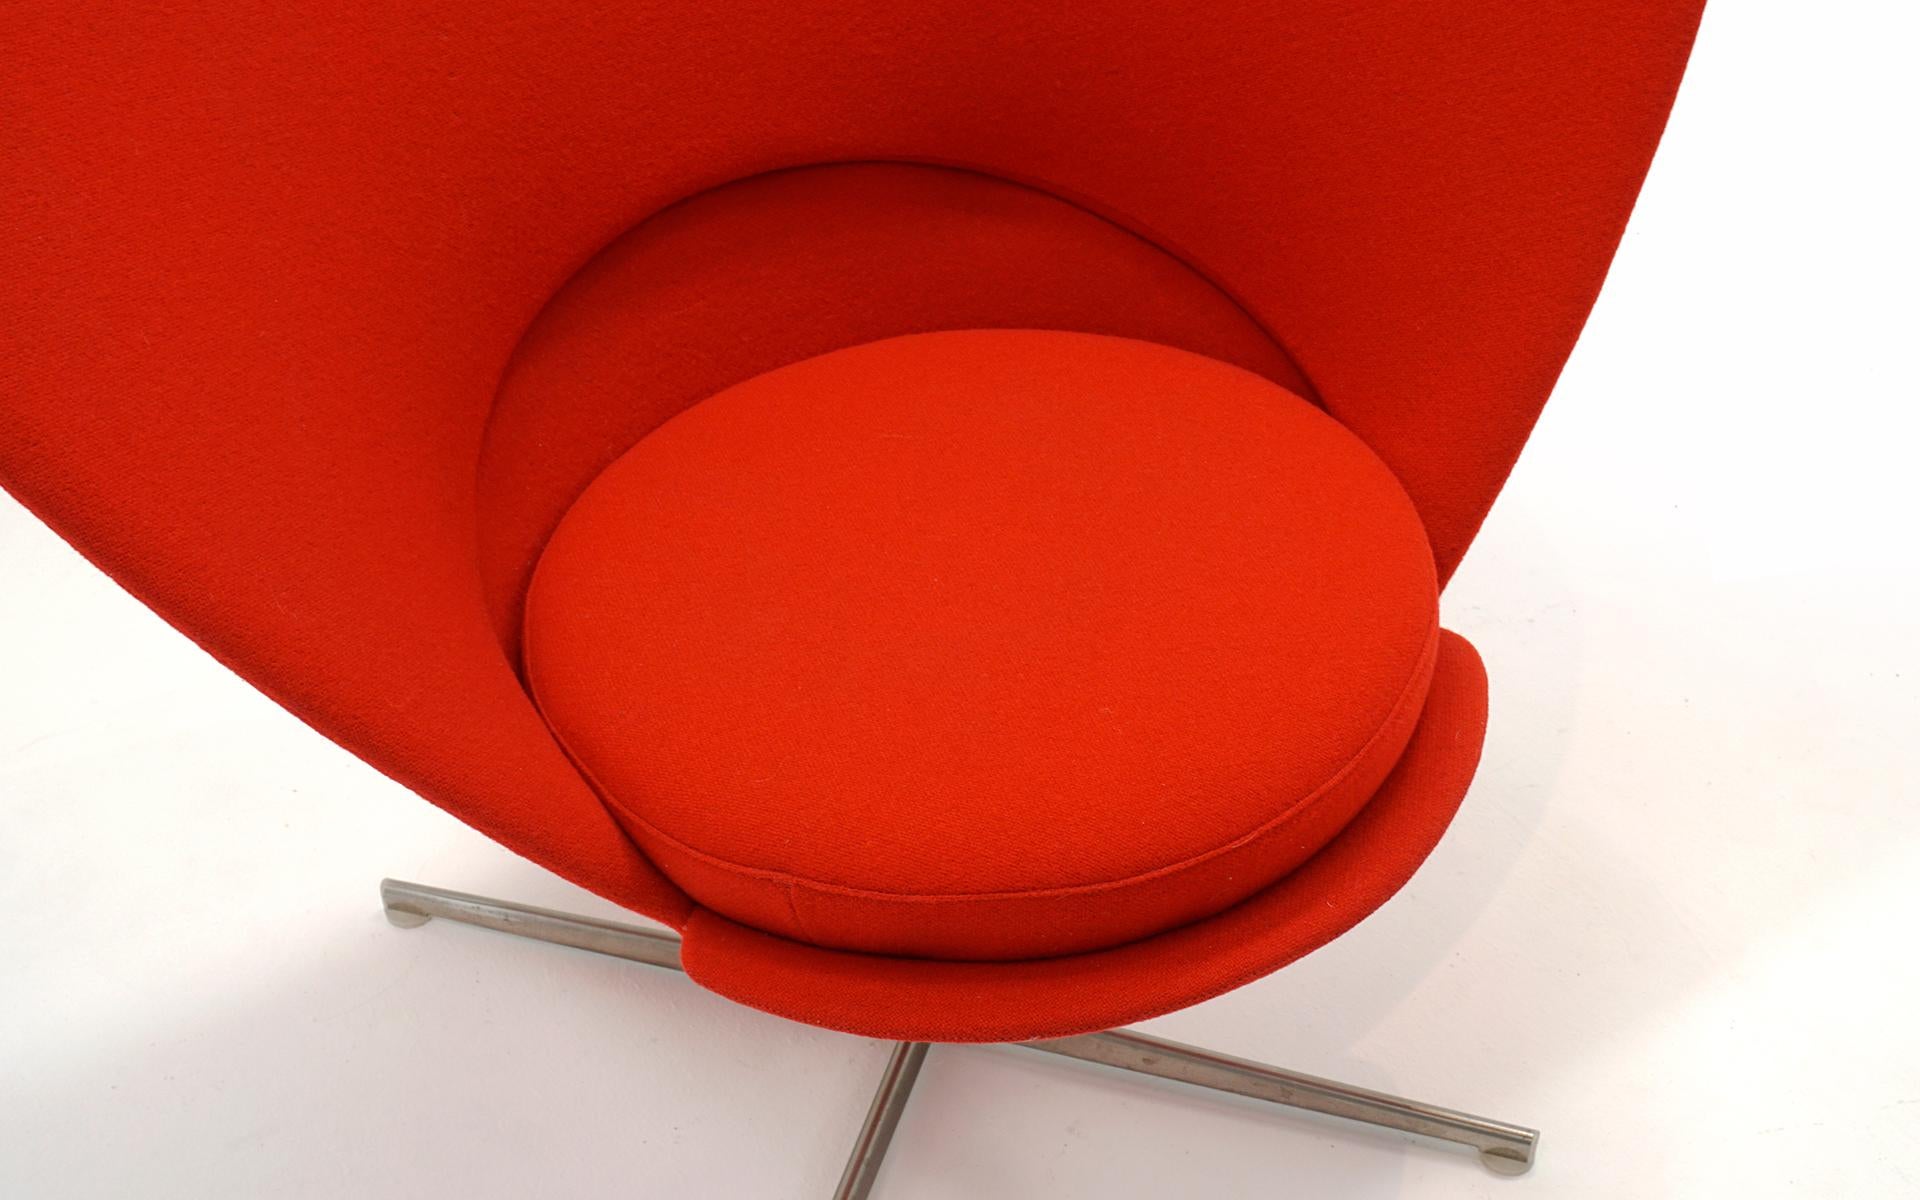 Contemporary Red Heart Chair by Verner Panton for Vitra, Great Condition